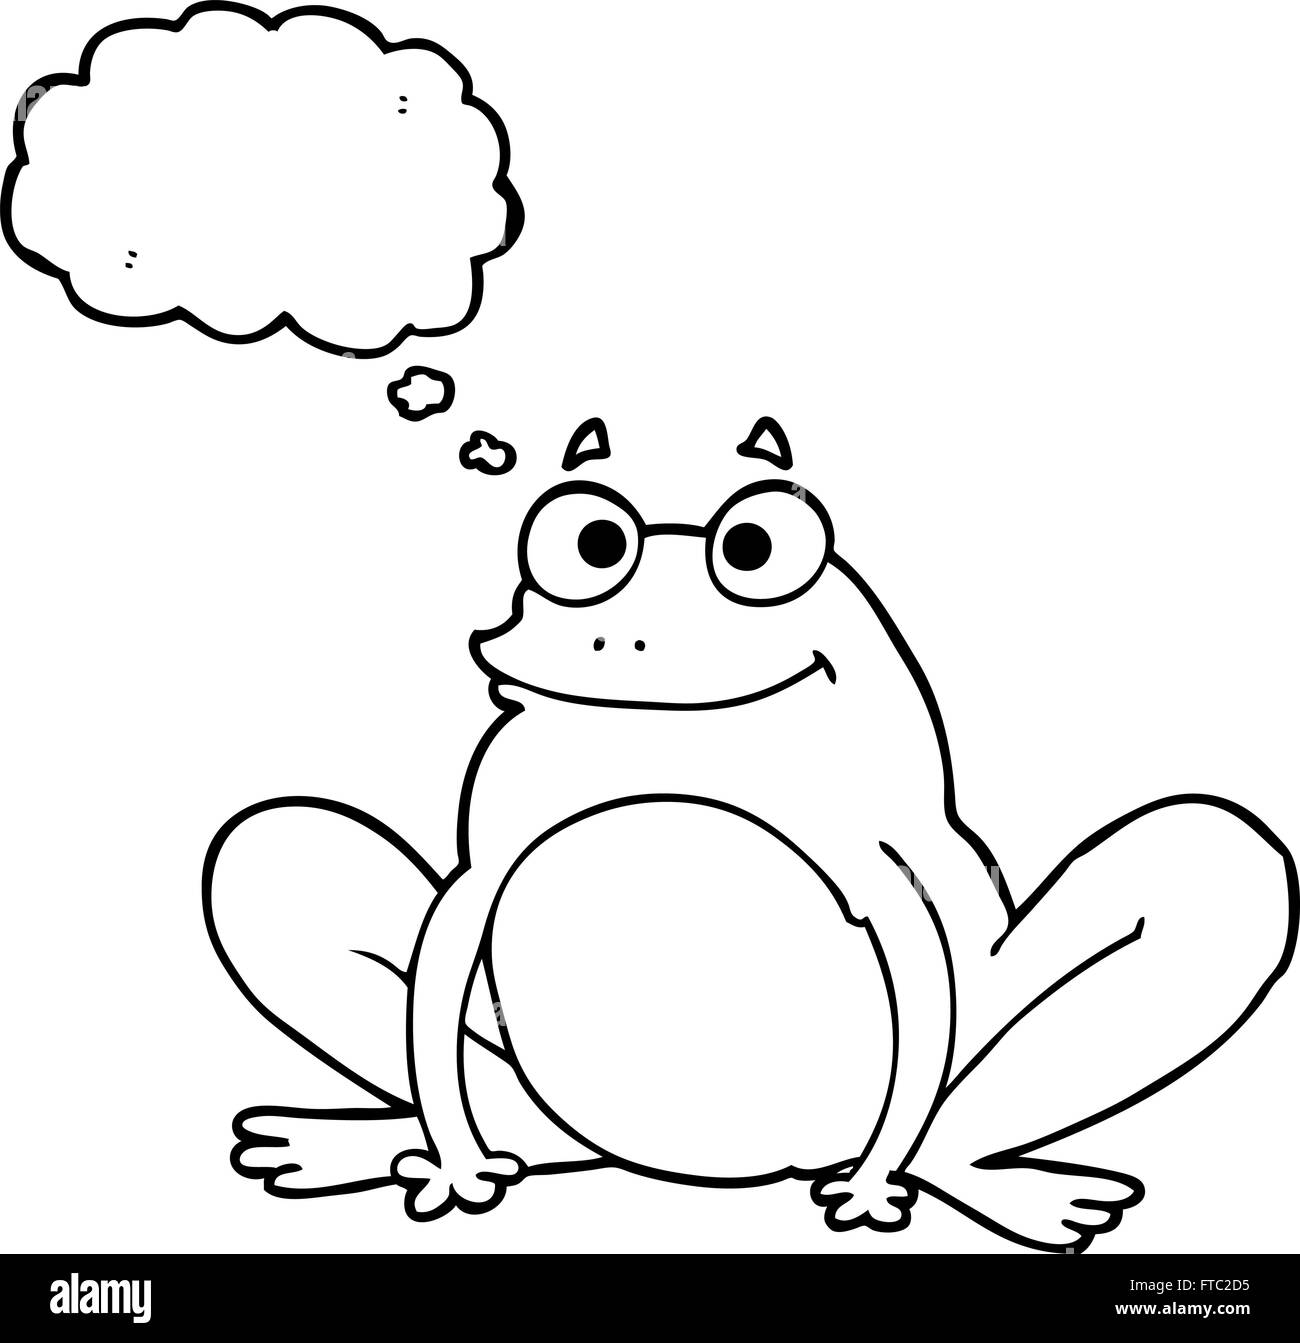 freehand drawn thought bubble cartoon happy frog Stock Vector